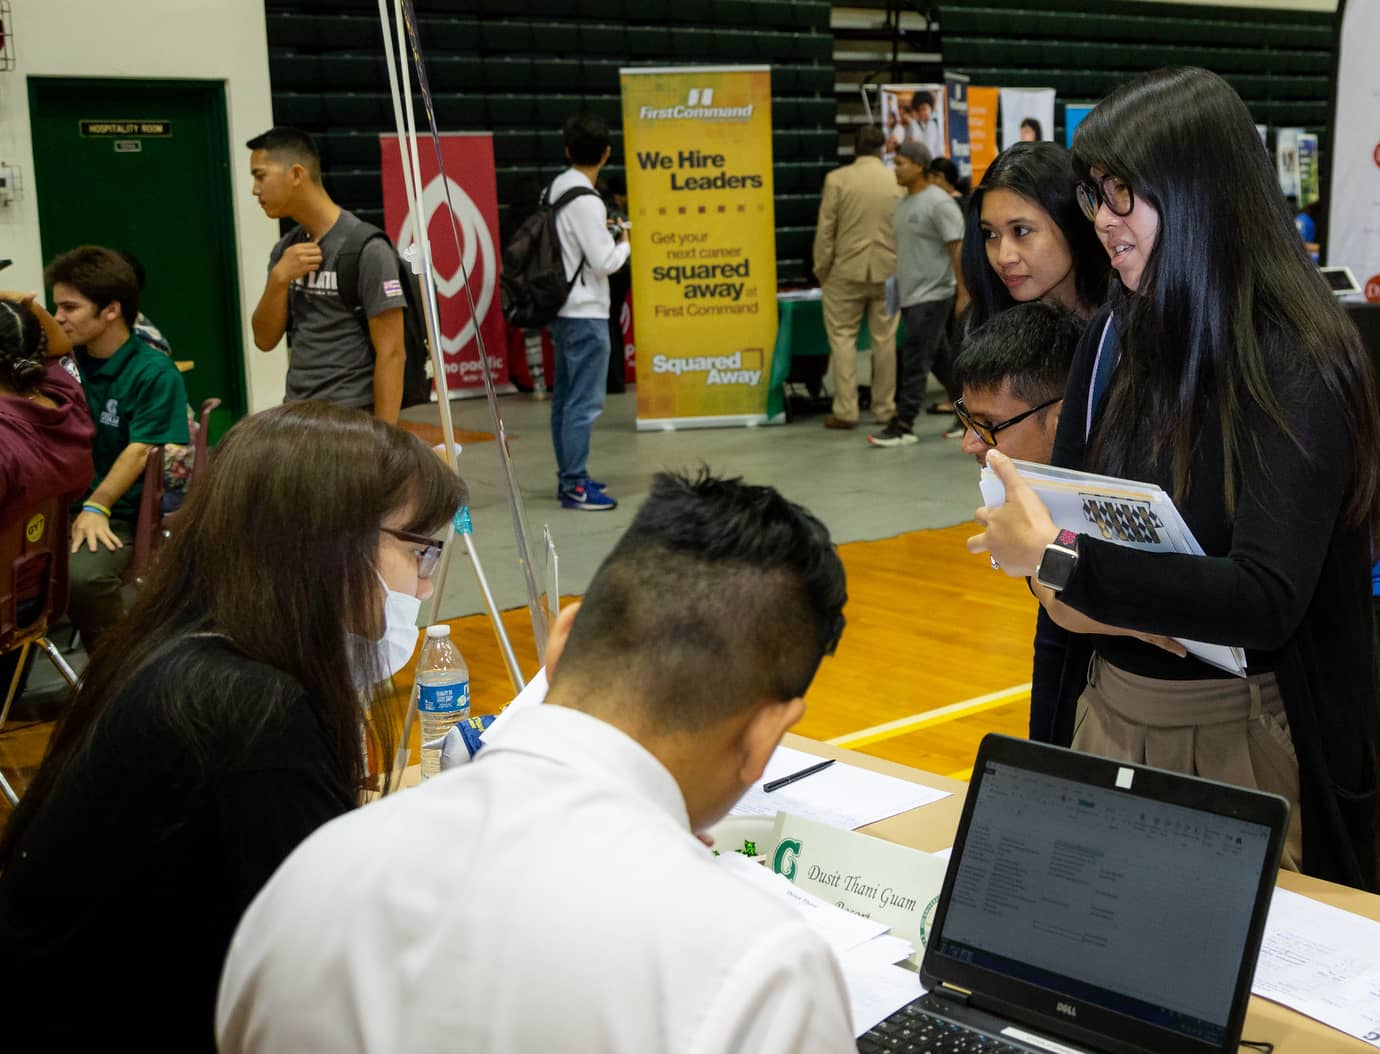 Photo of students at a UOG job fair held in 2019